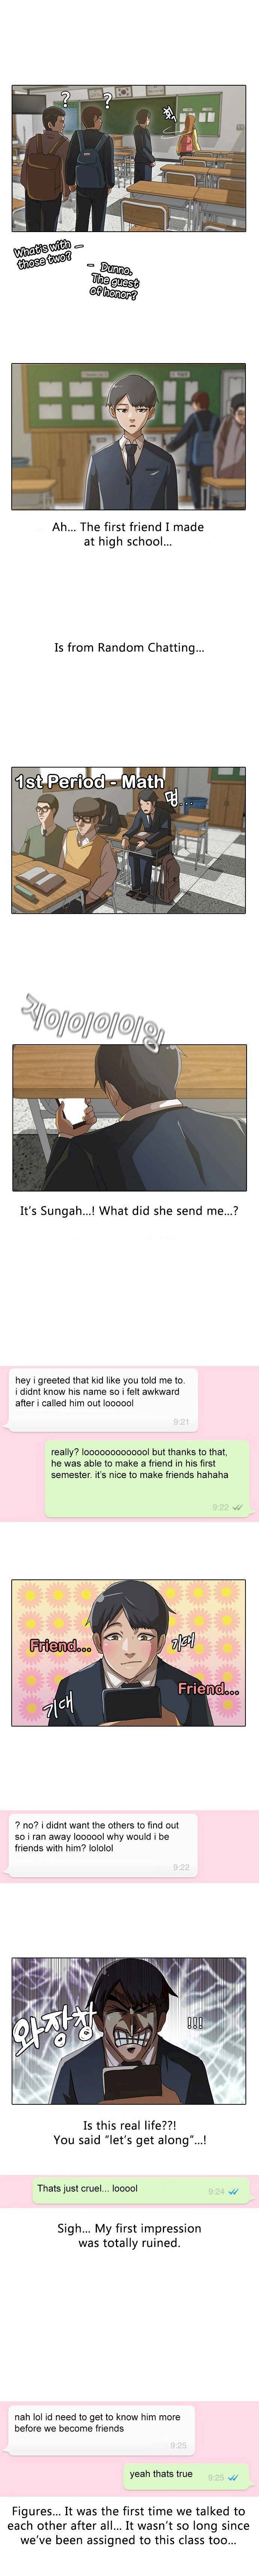 The Girl from Random Chatting! - Chapter 2 Page 3